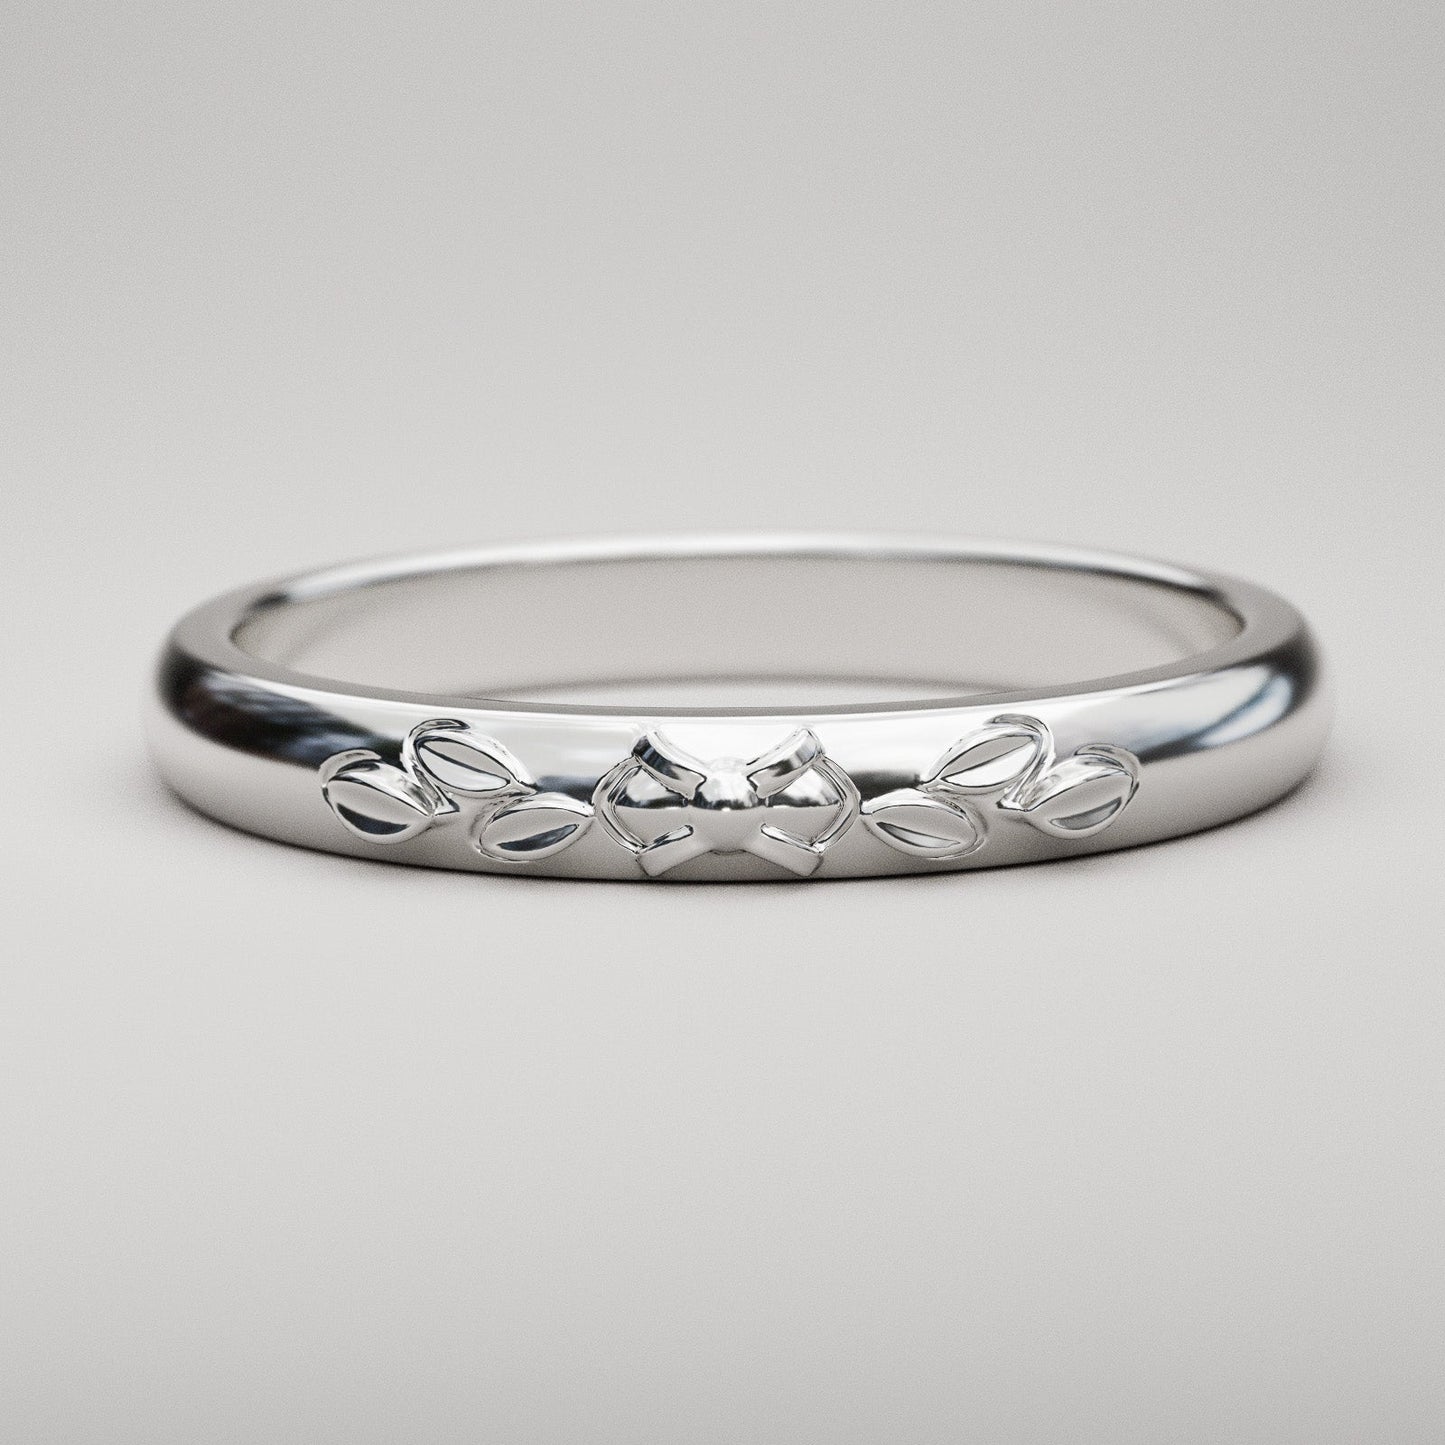 White gold wedding band with leaf design for woman in 14k or 18k gold